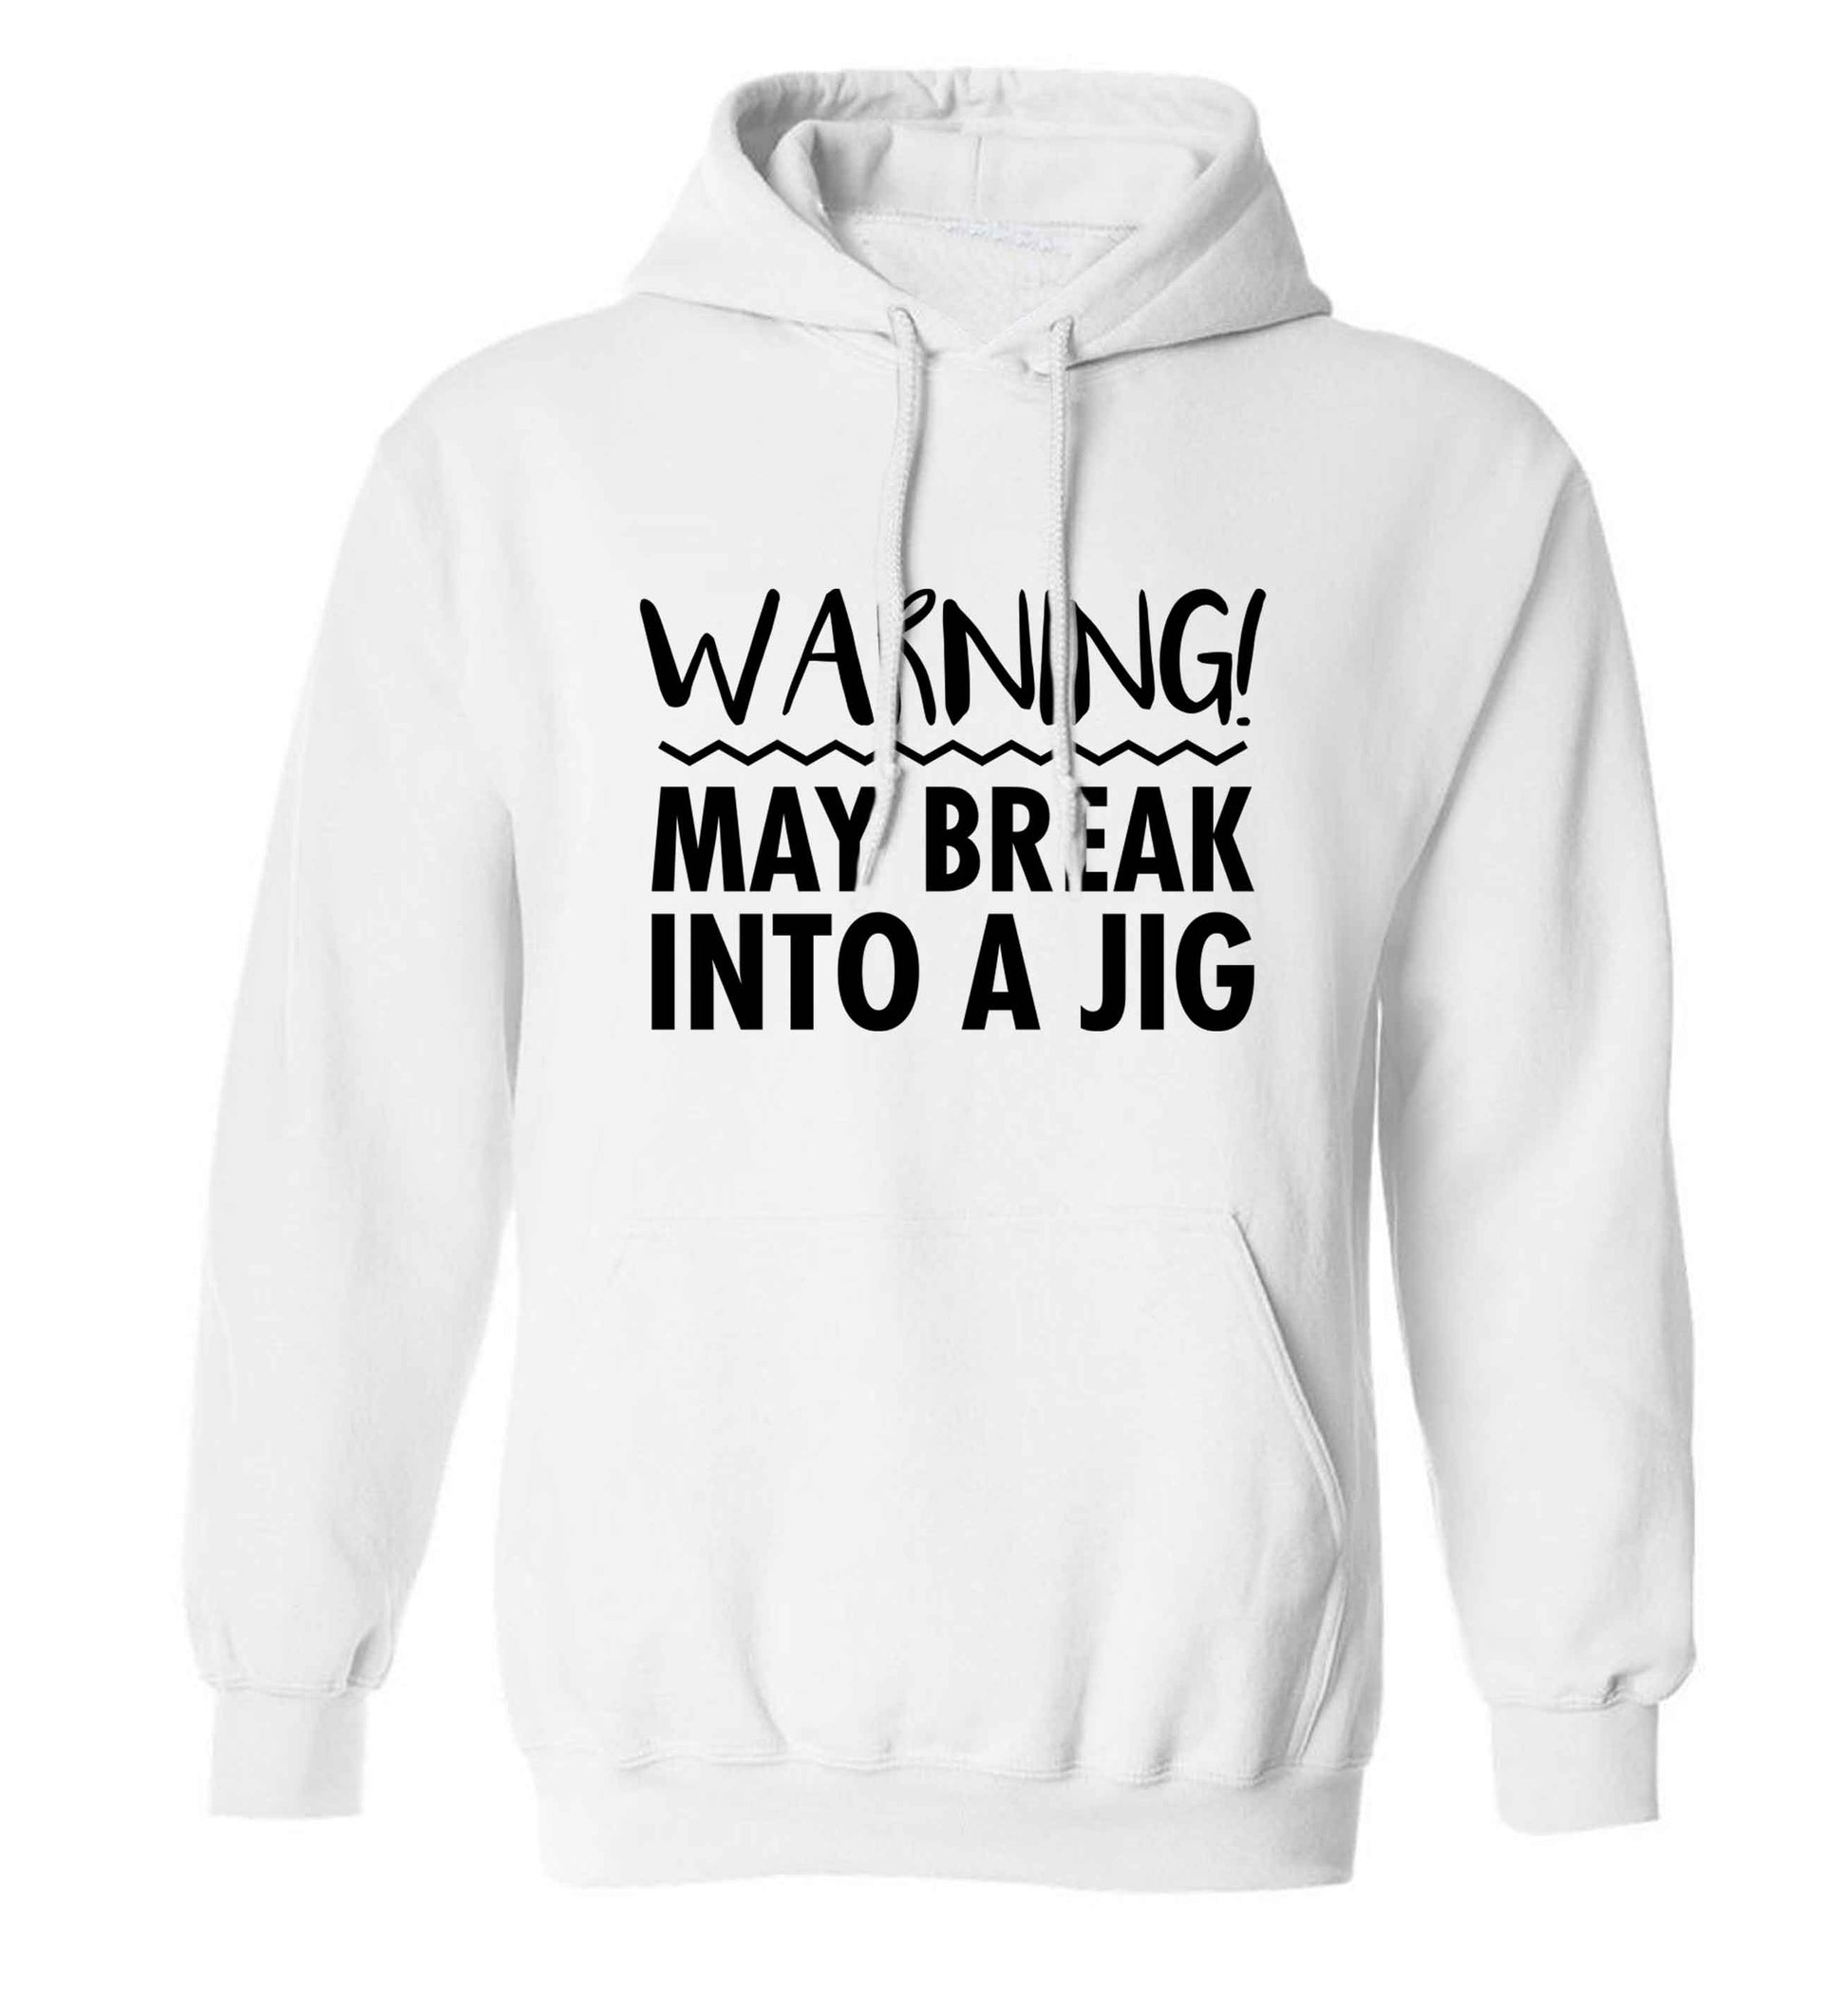 Warning may break into a jig adults unisex white hoodie 2XL